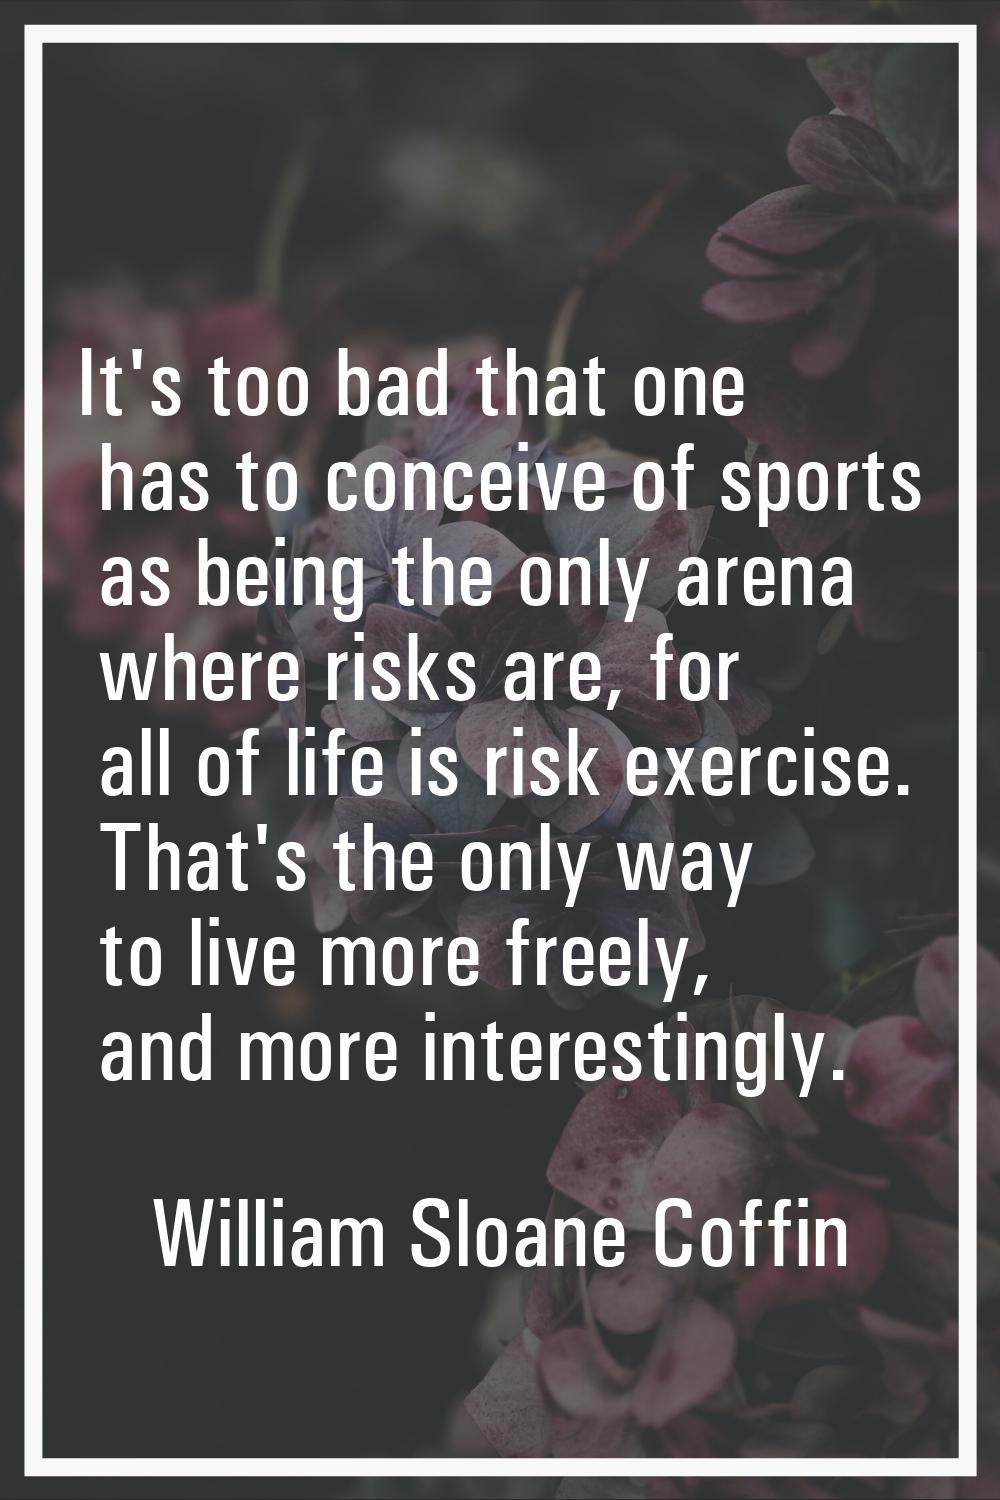 It's too bad that one has to conceive of sports as being the only arena where risks are, for all of